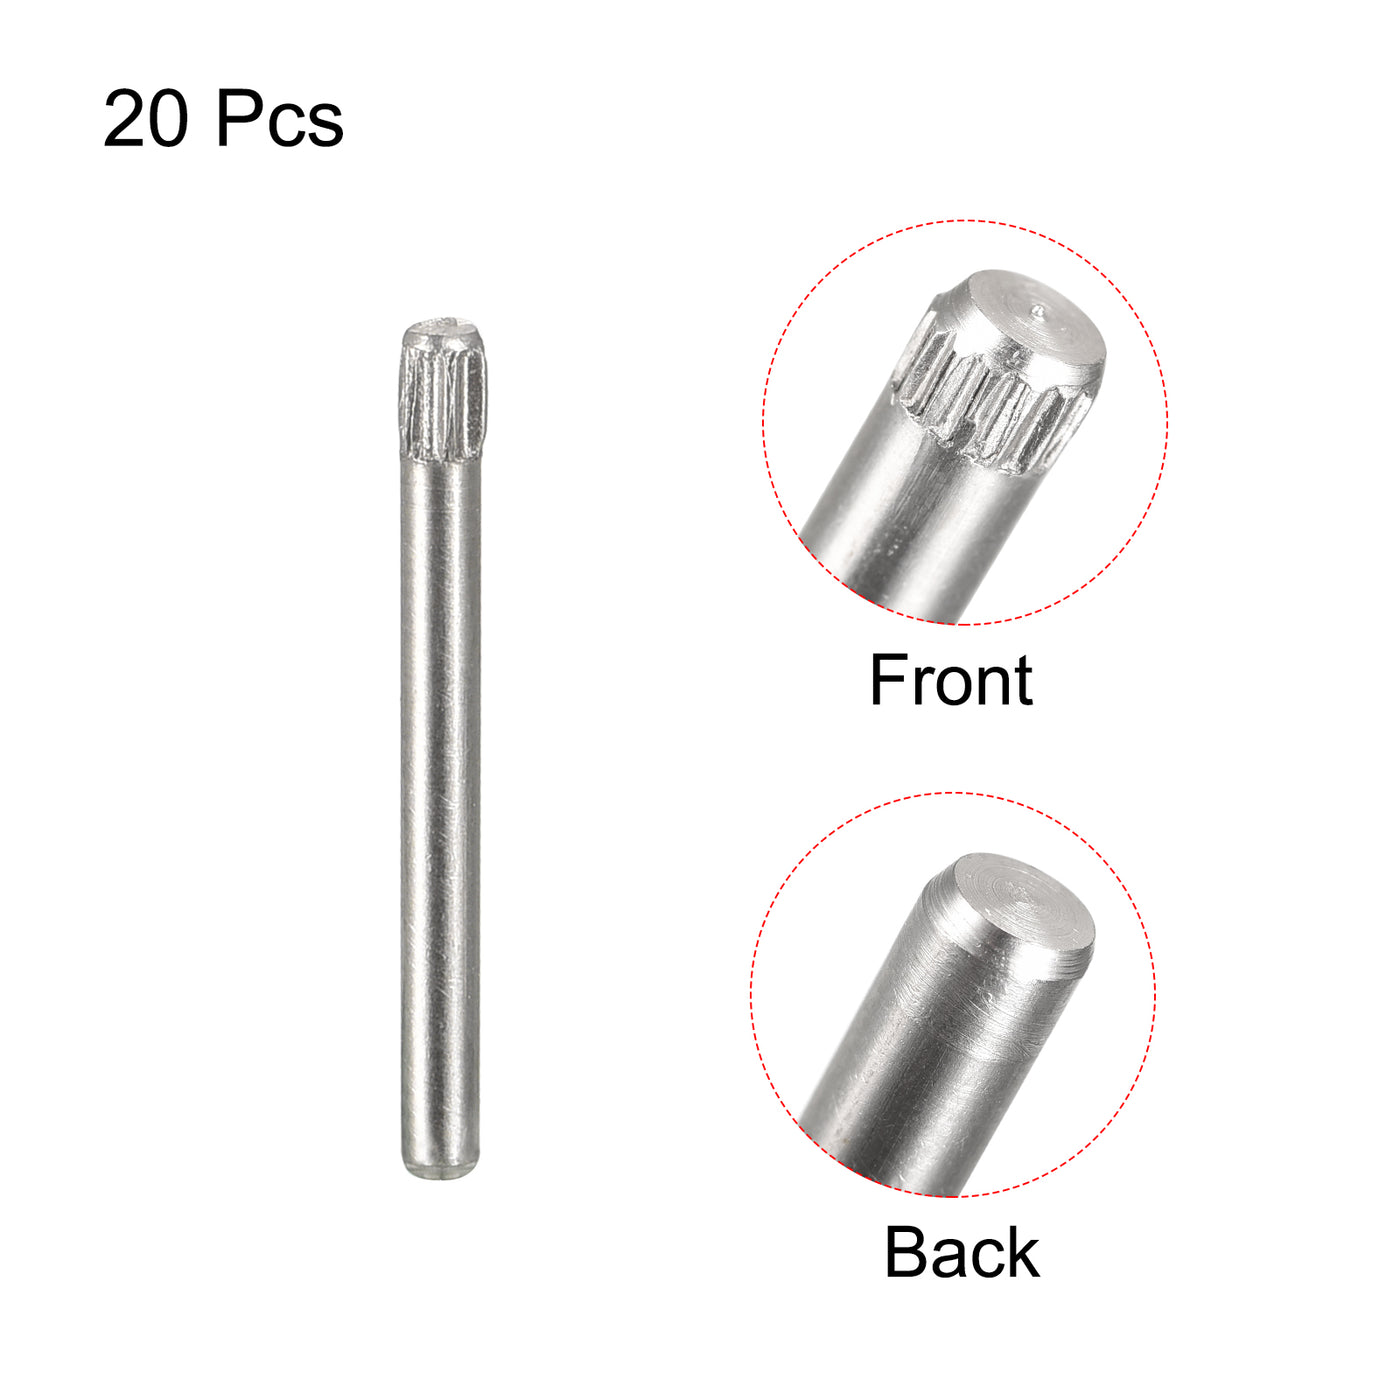 uxcell Uxcell 1.5x16mm 304 Stainless Steel Dowel Pins, 20Pcs Knurled Head Flat End Dowel Pin